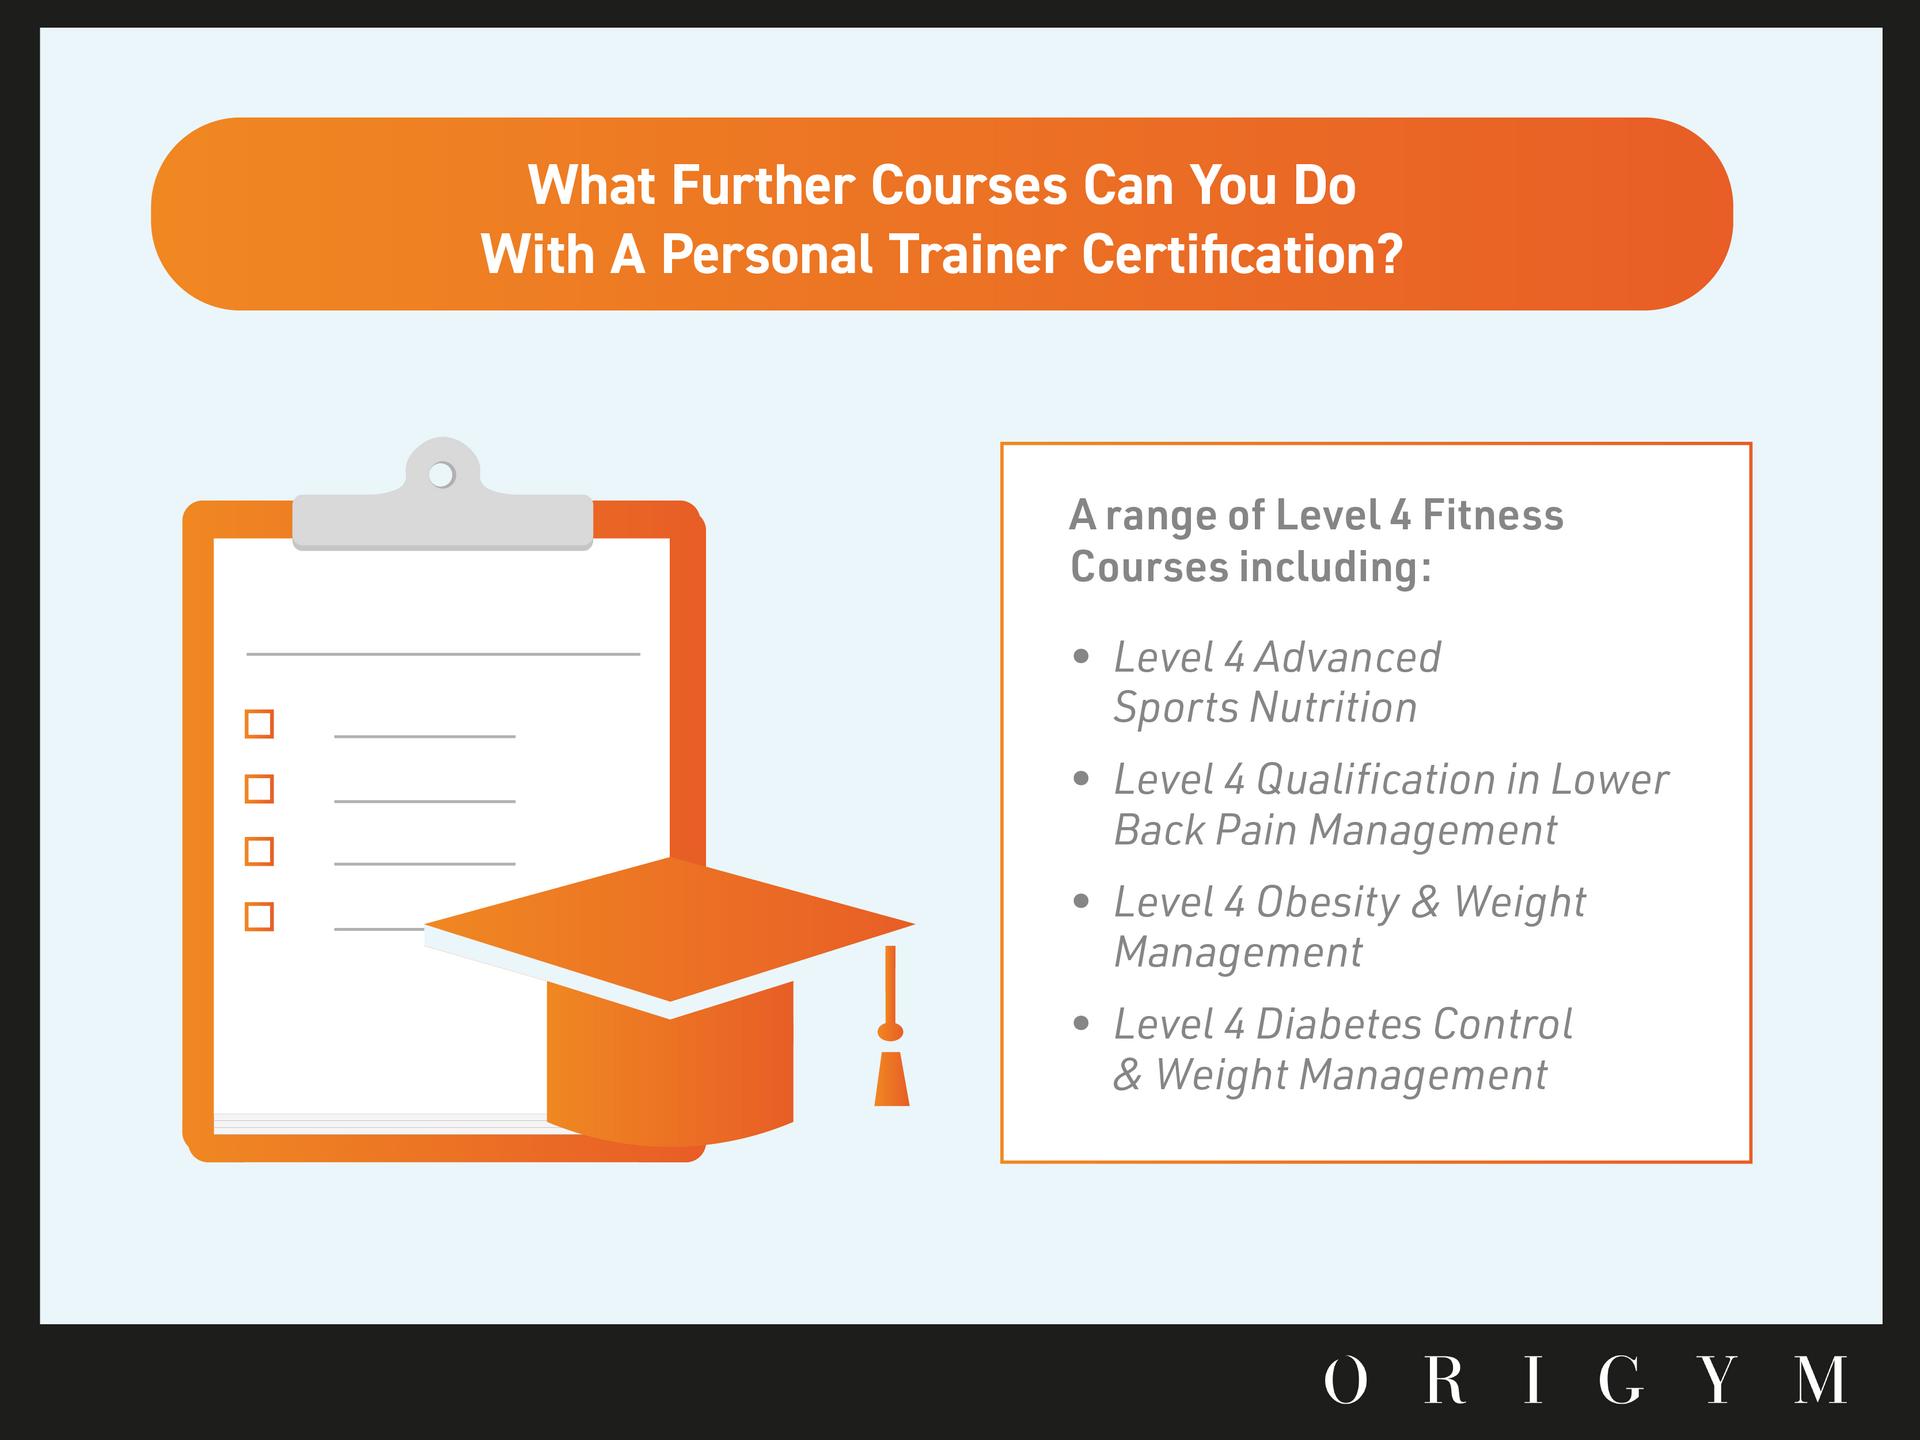 What Further Courses Can You Do With a Personal Trainer Certification Infographic